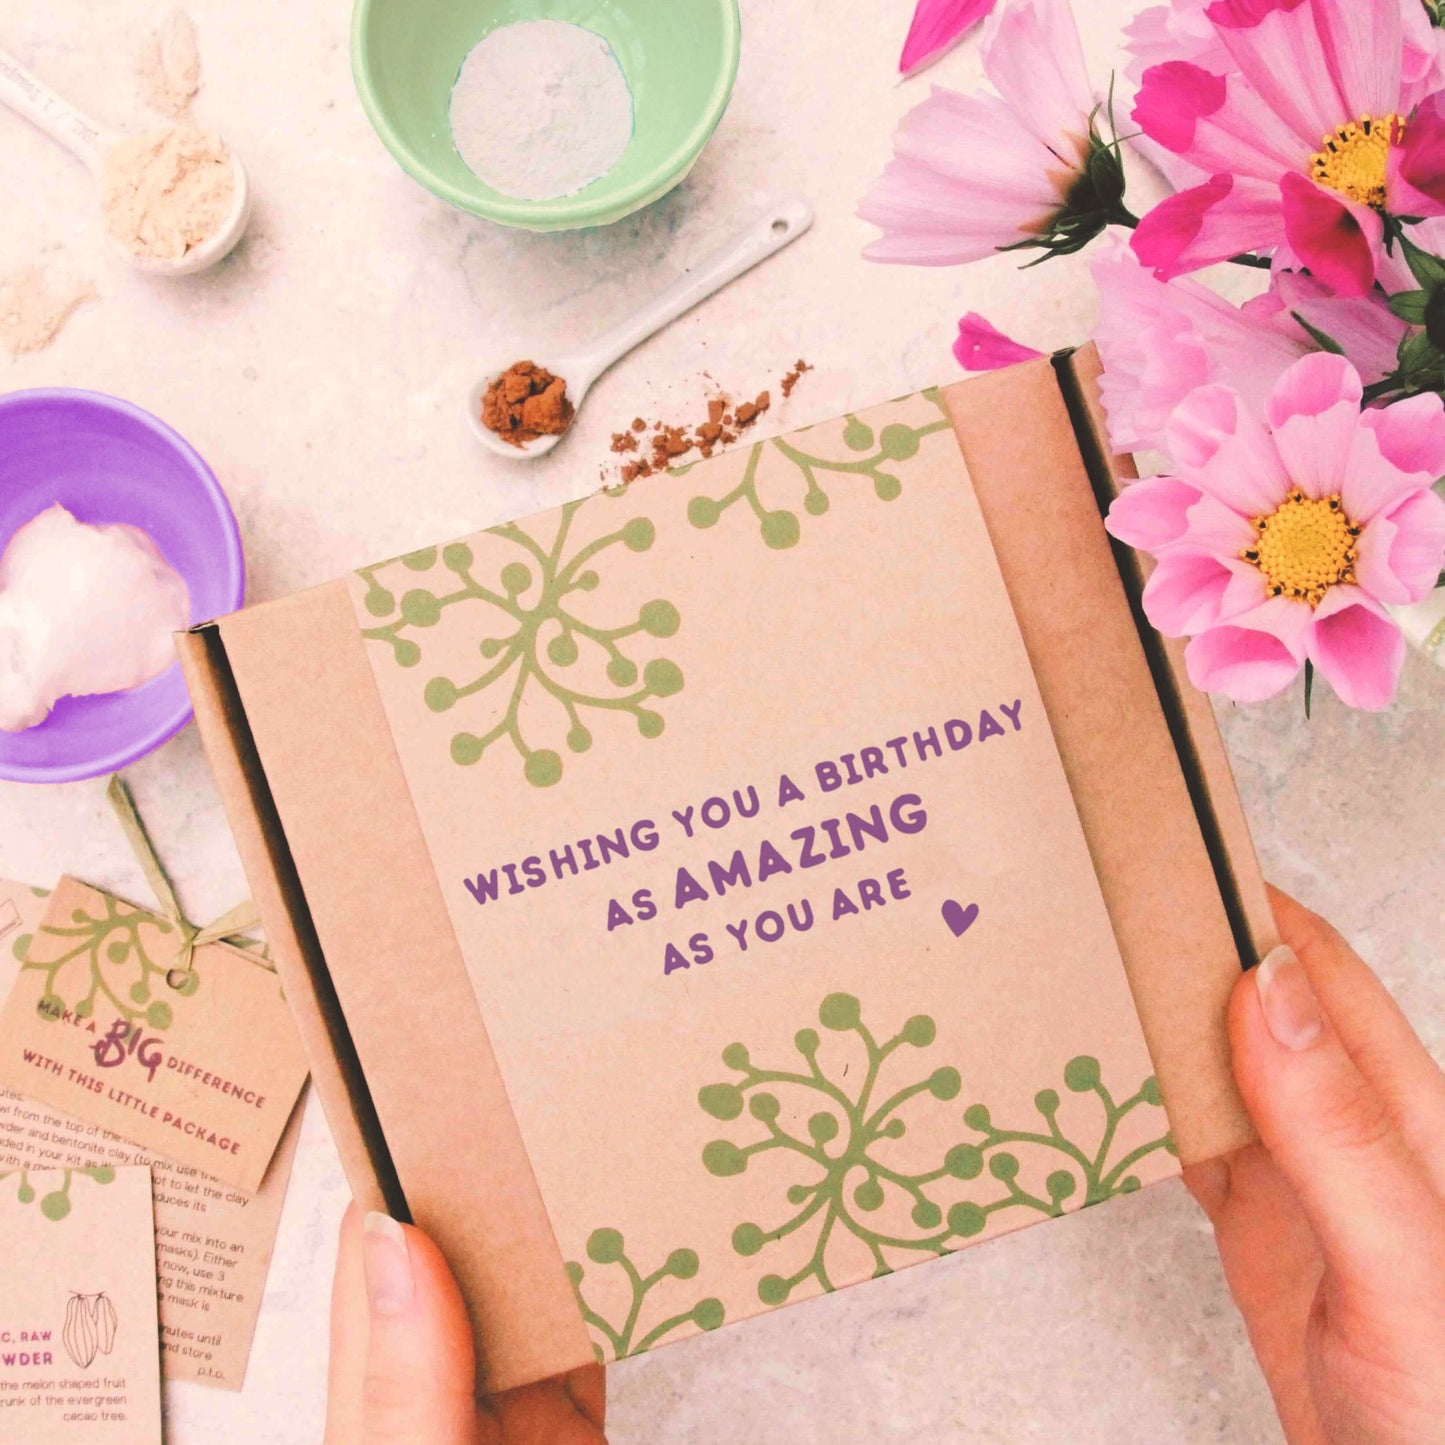 birthday letterbox gift with gift message 'wishing you a birthday as amazing as you are'